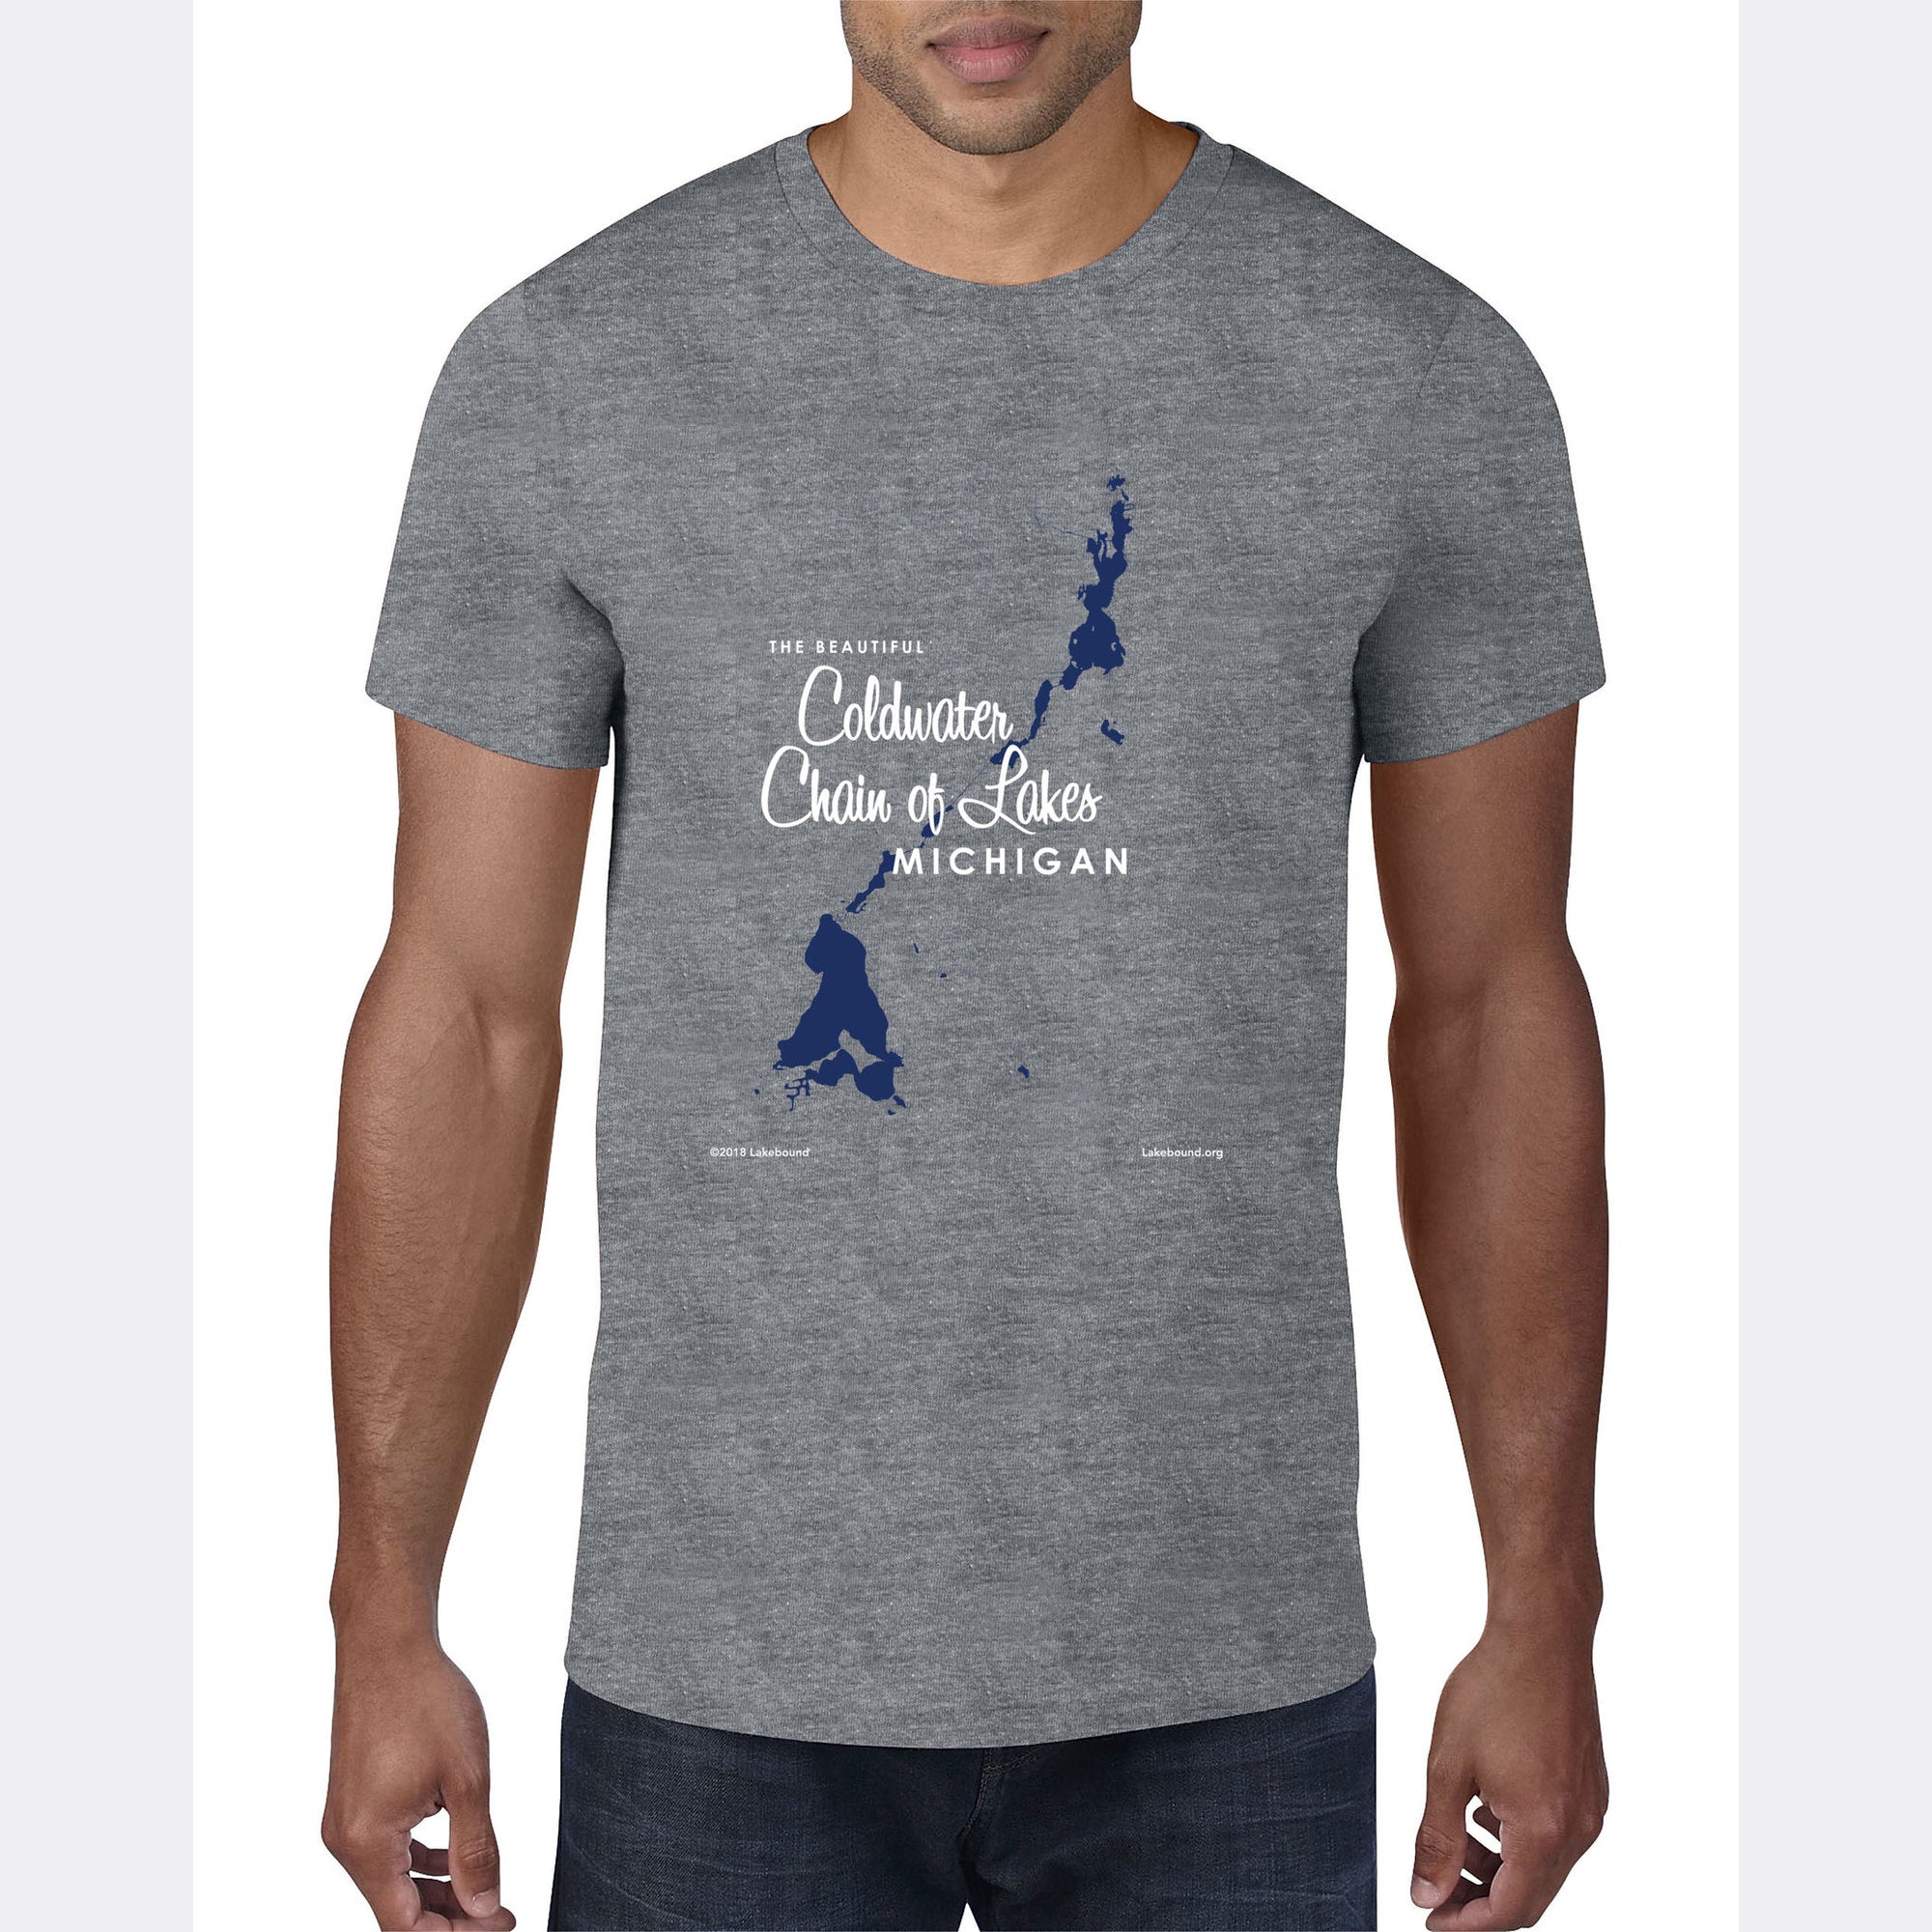 Coldwater Chain of Lakes Michigan, T-Shirt